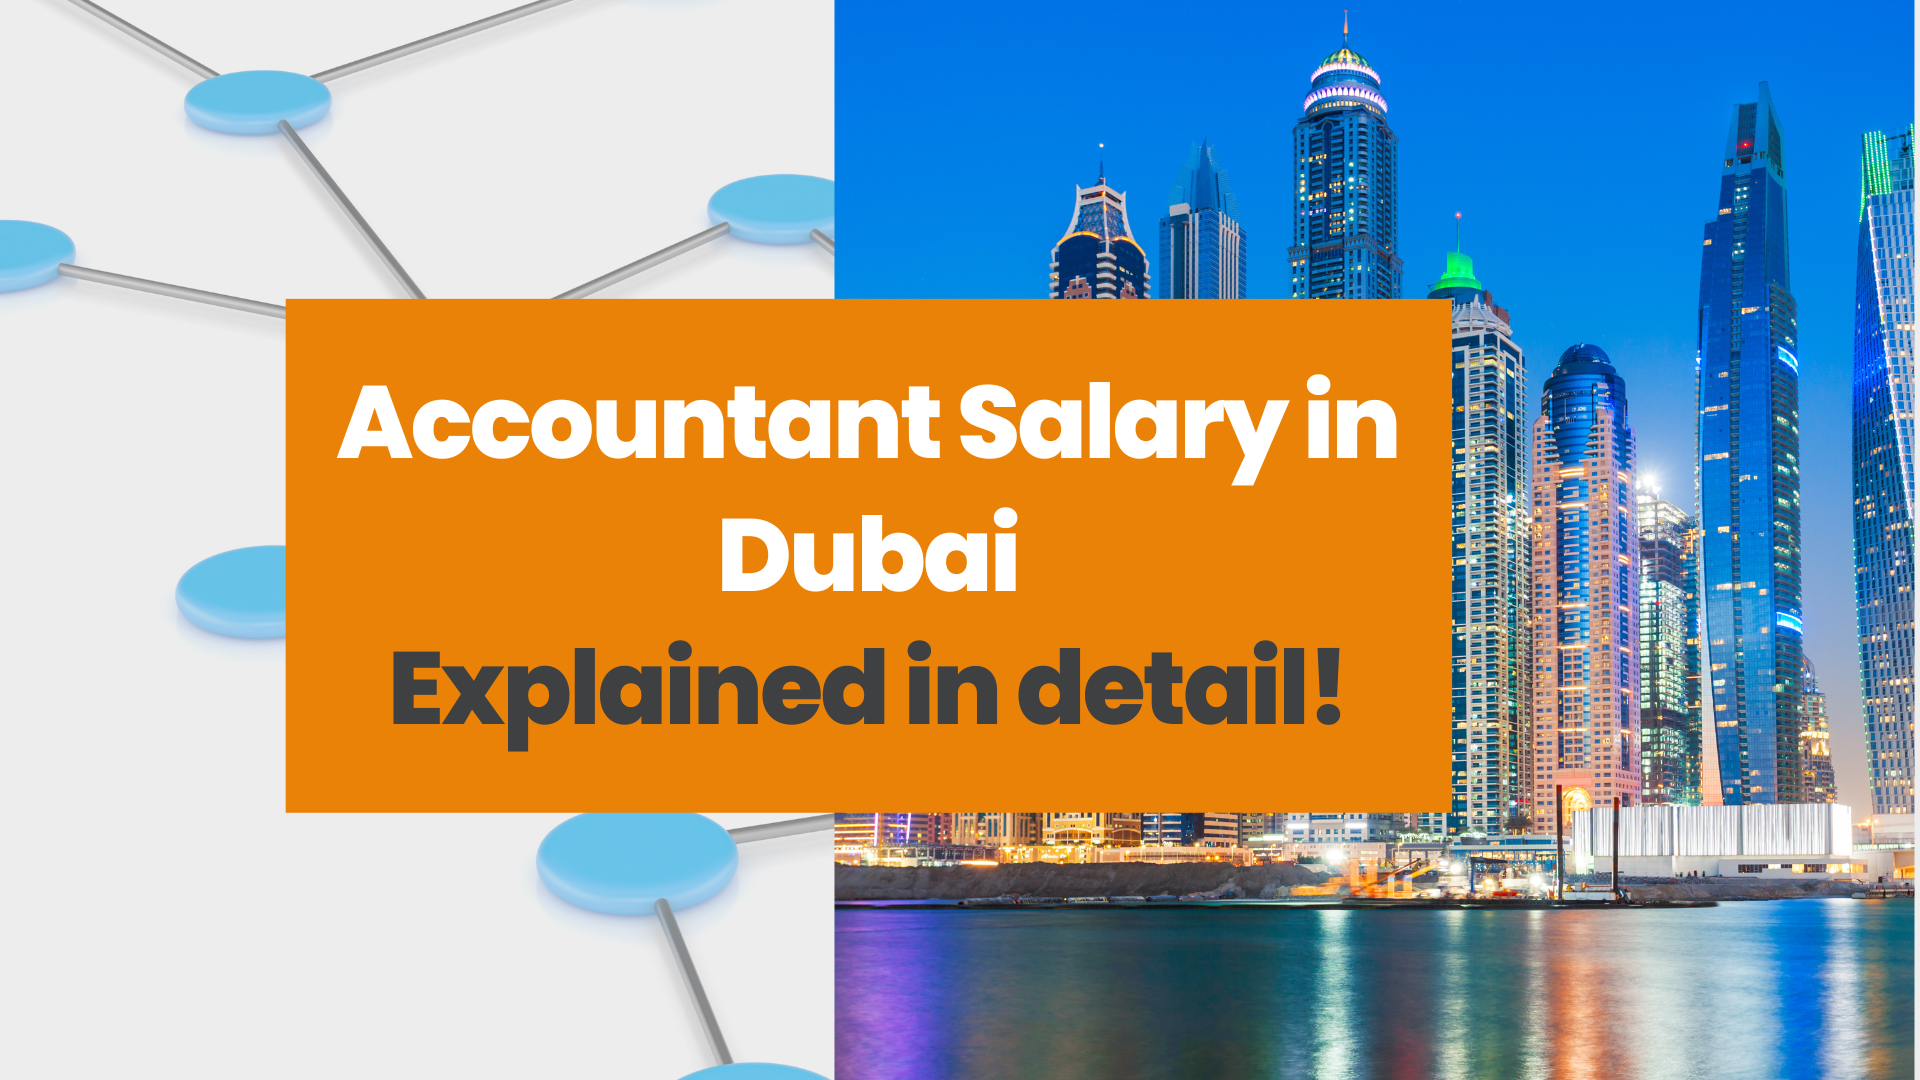 Accountant Salary in Dubai Explained in detail!